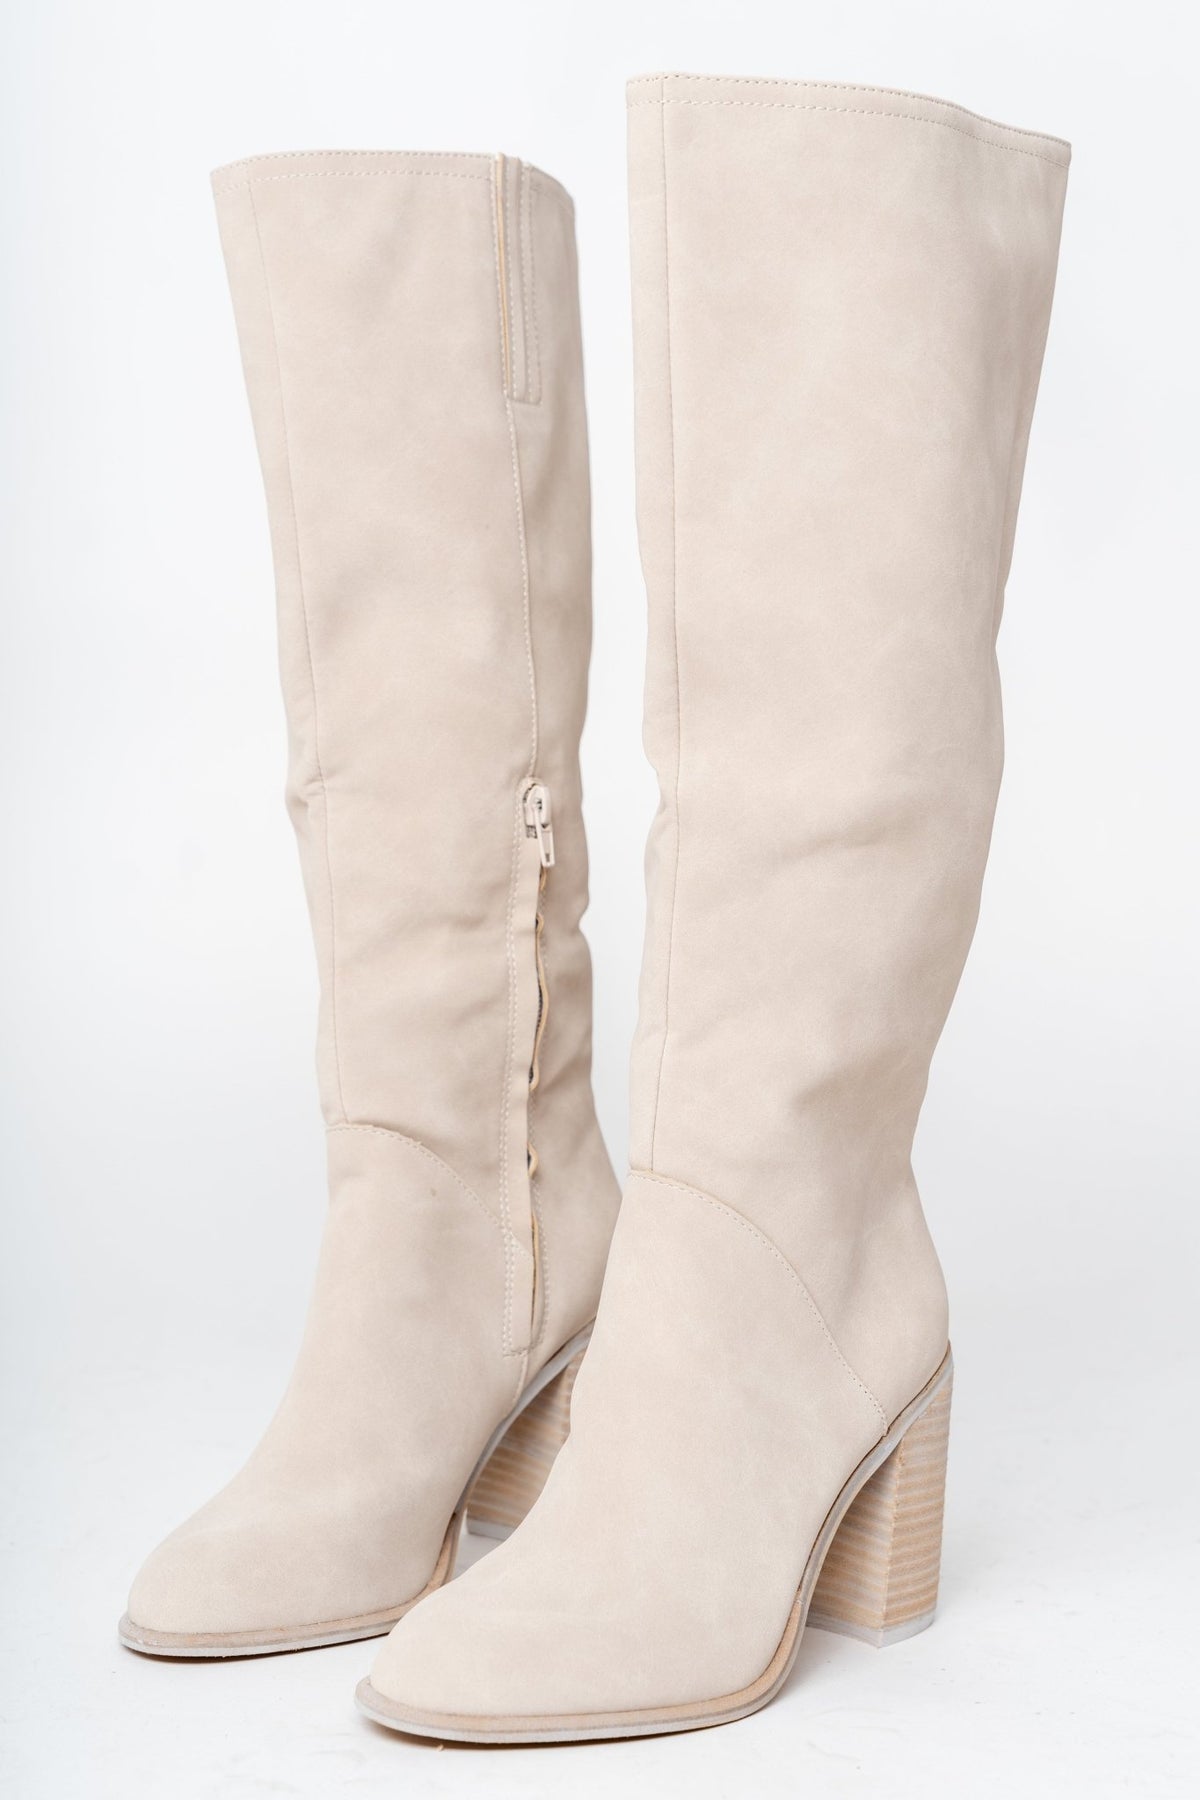 Shiloh knee high boot light grey - Cute shoes - Trendy Shoes at Lush Fashion Lounge Boutique in Oklahoma City